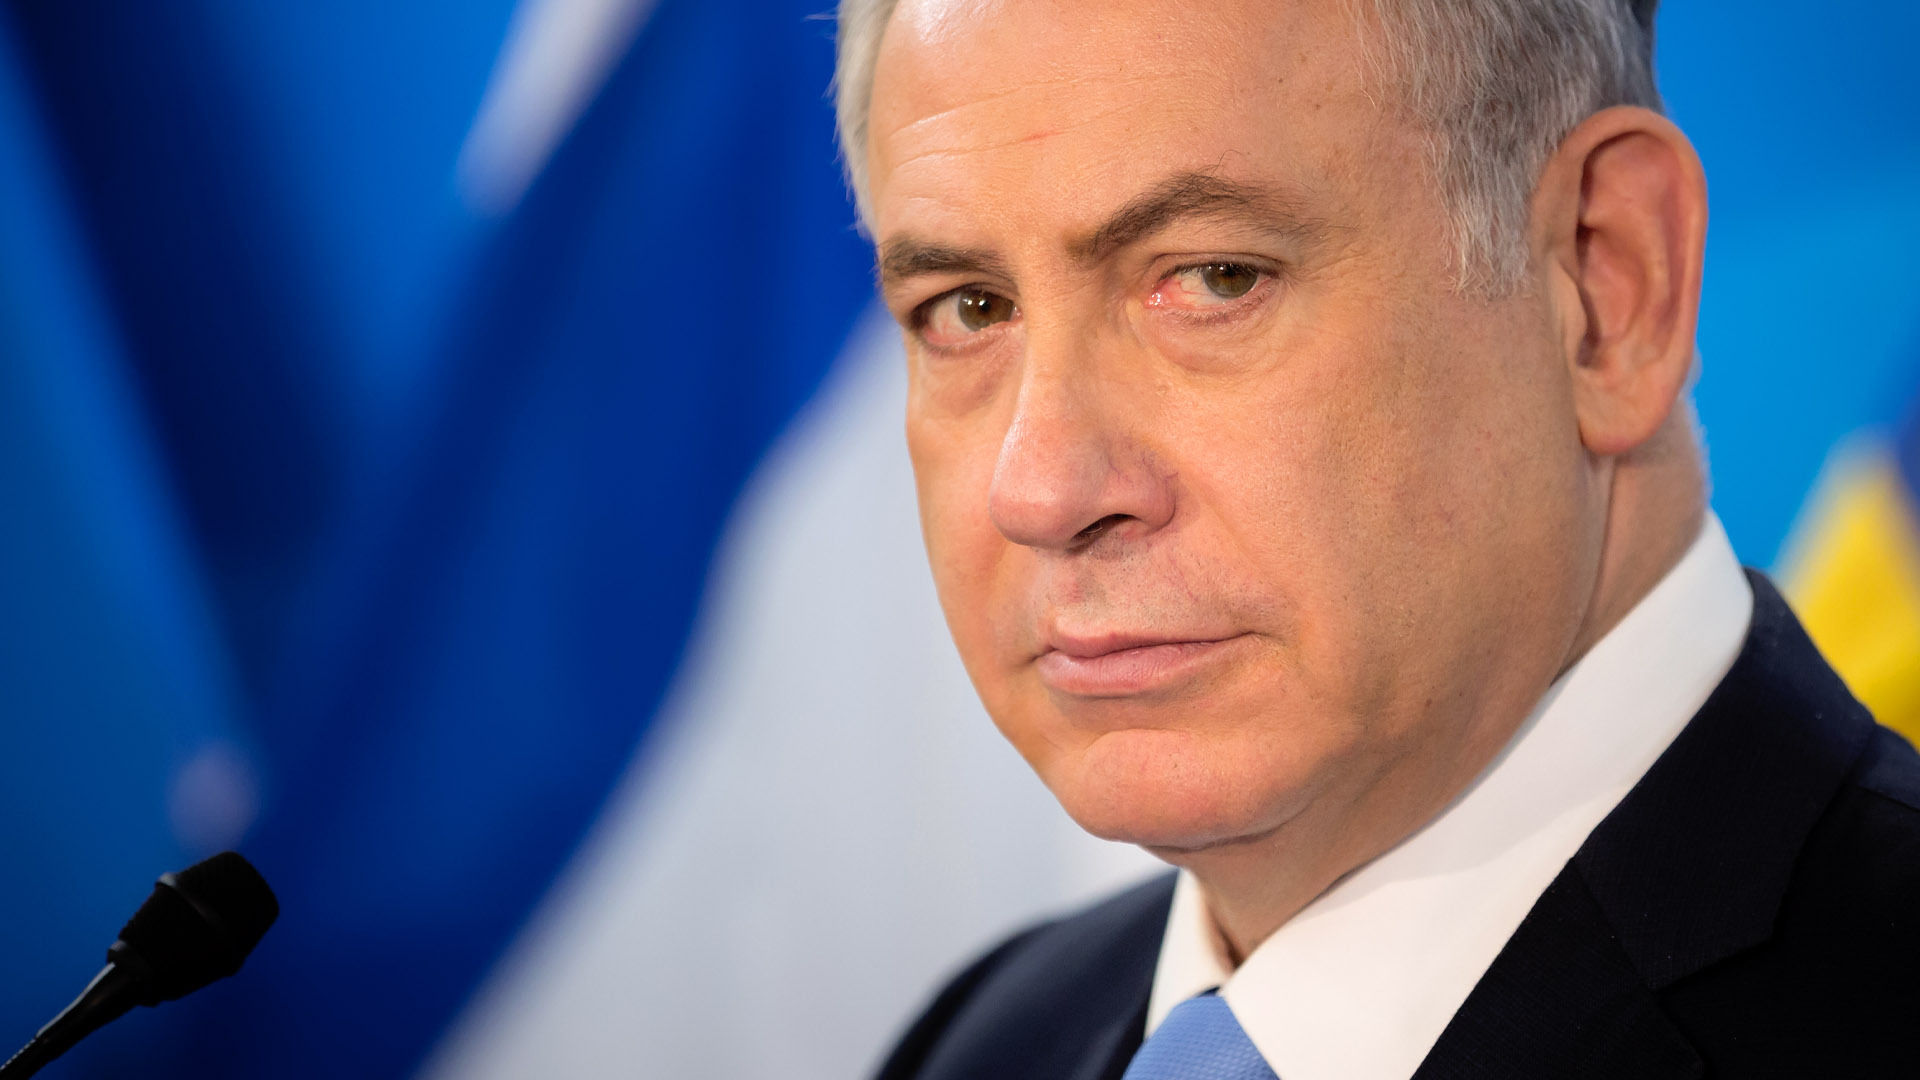 How Israel is responding to the ICJ ruling